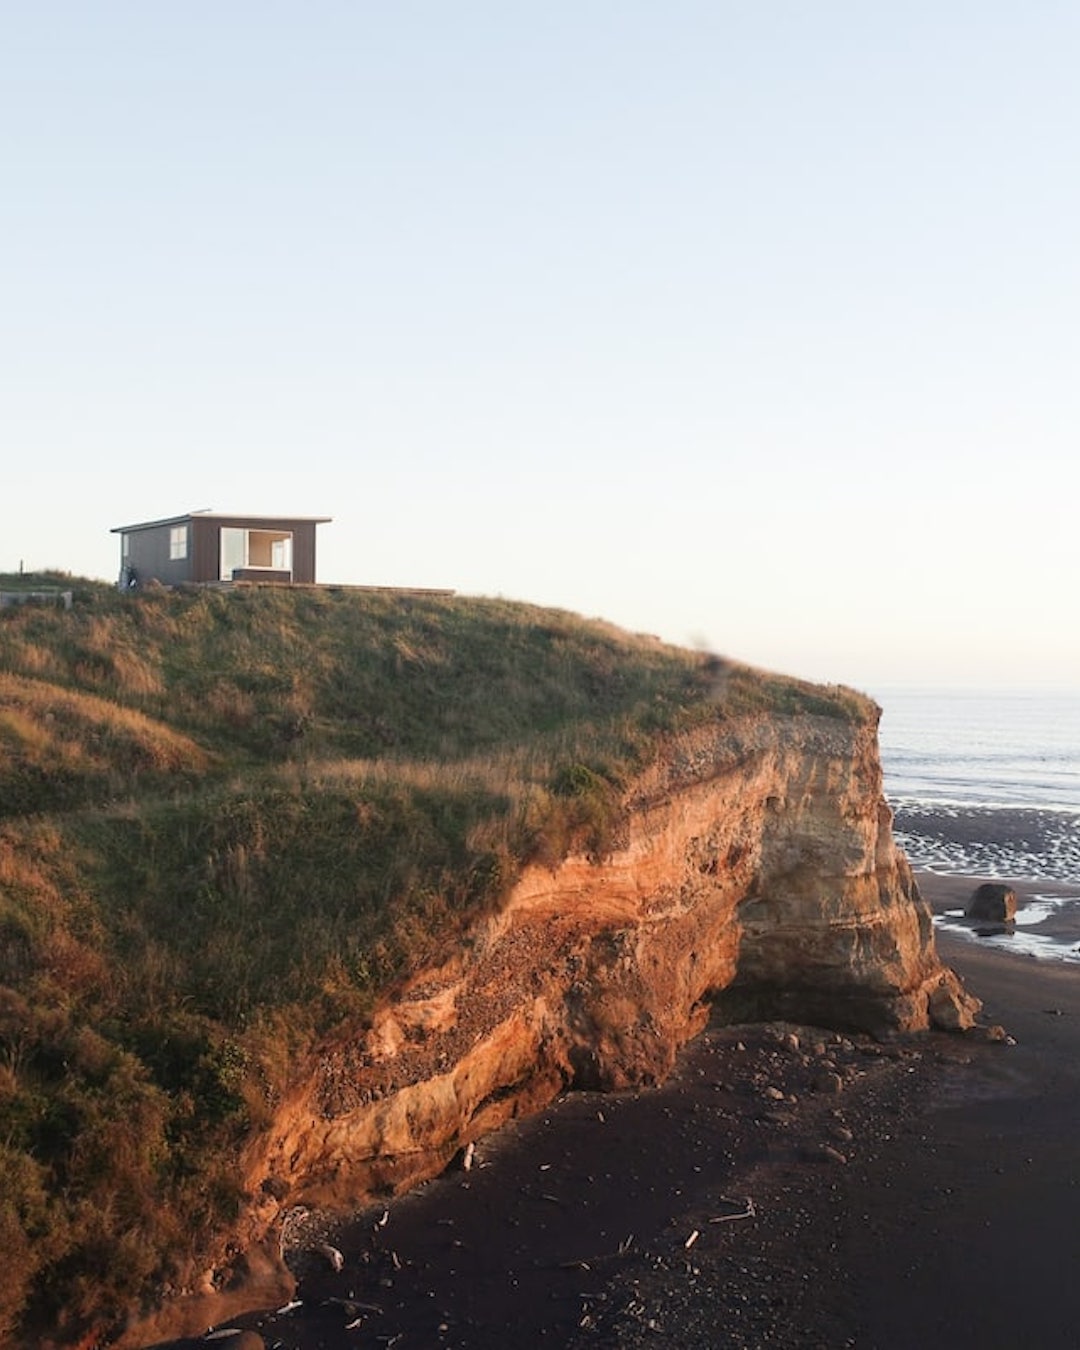 A small Airbnb cabin on a cliff above a New Zealand black sand beach